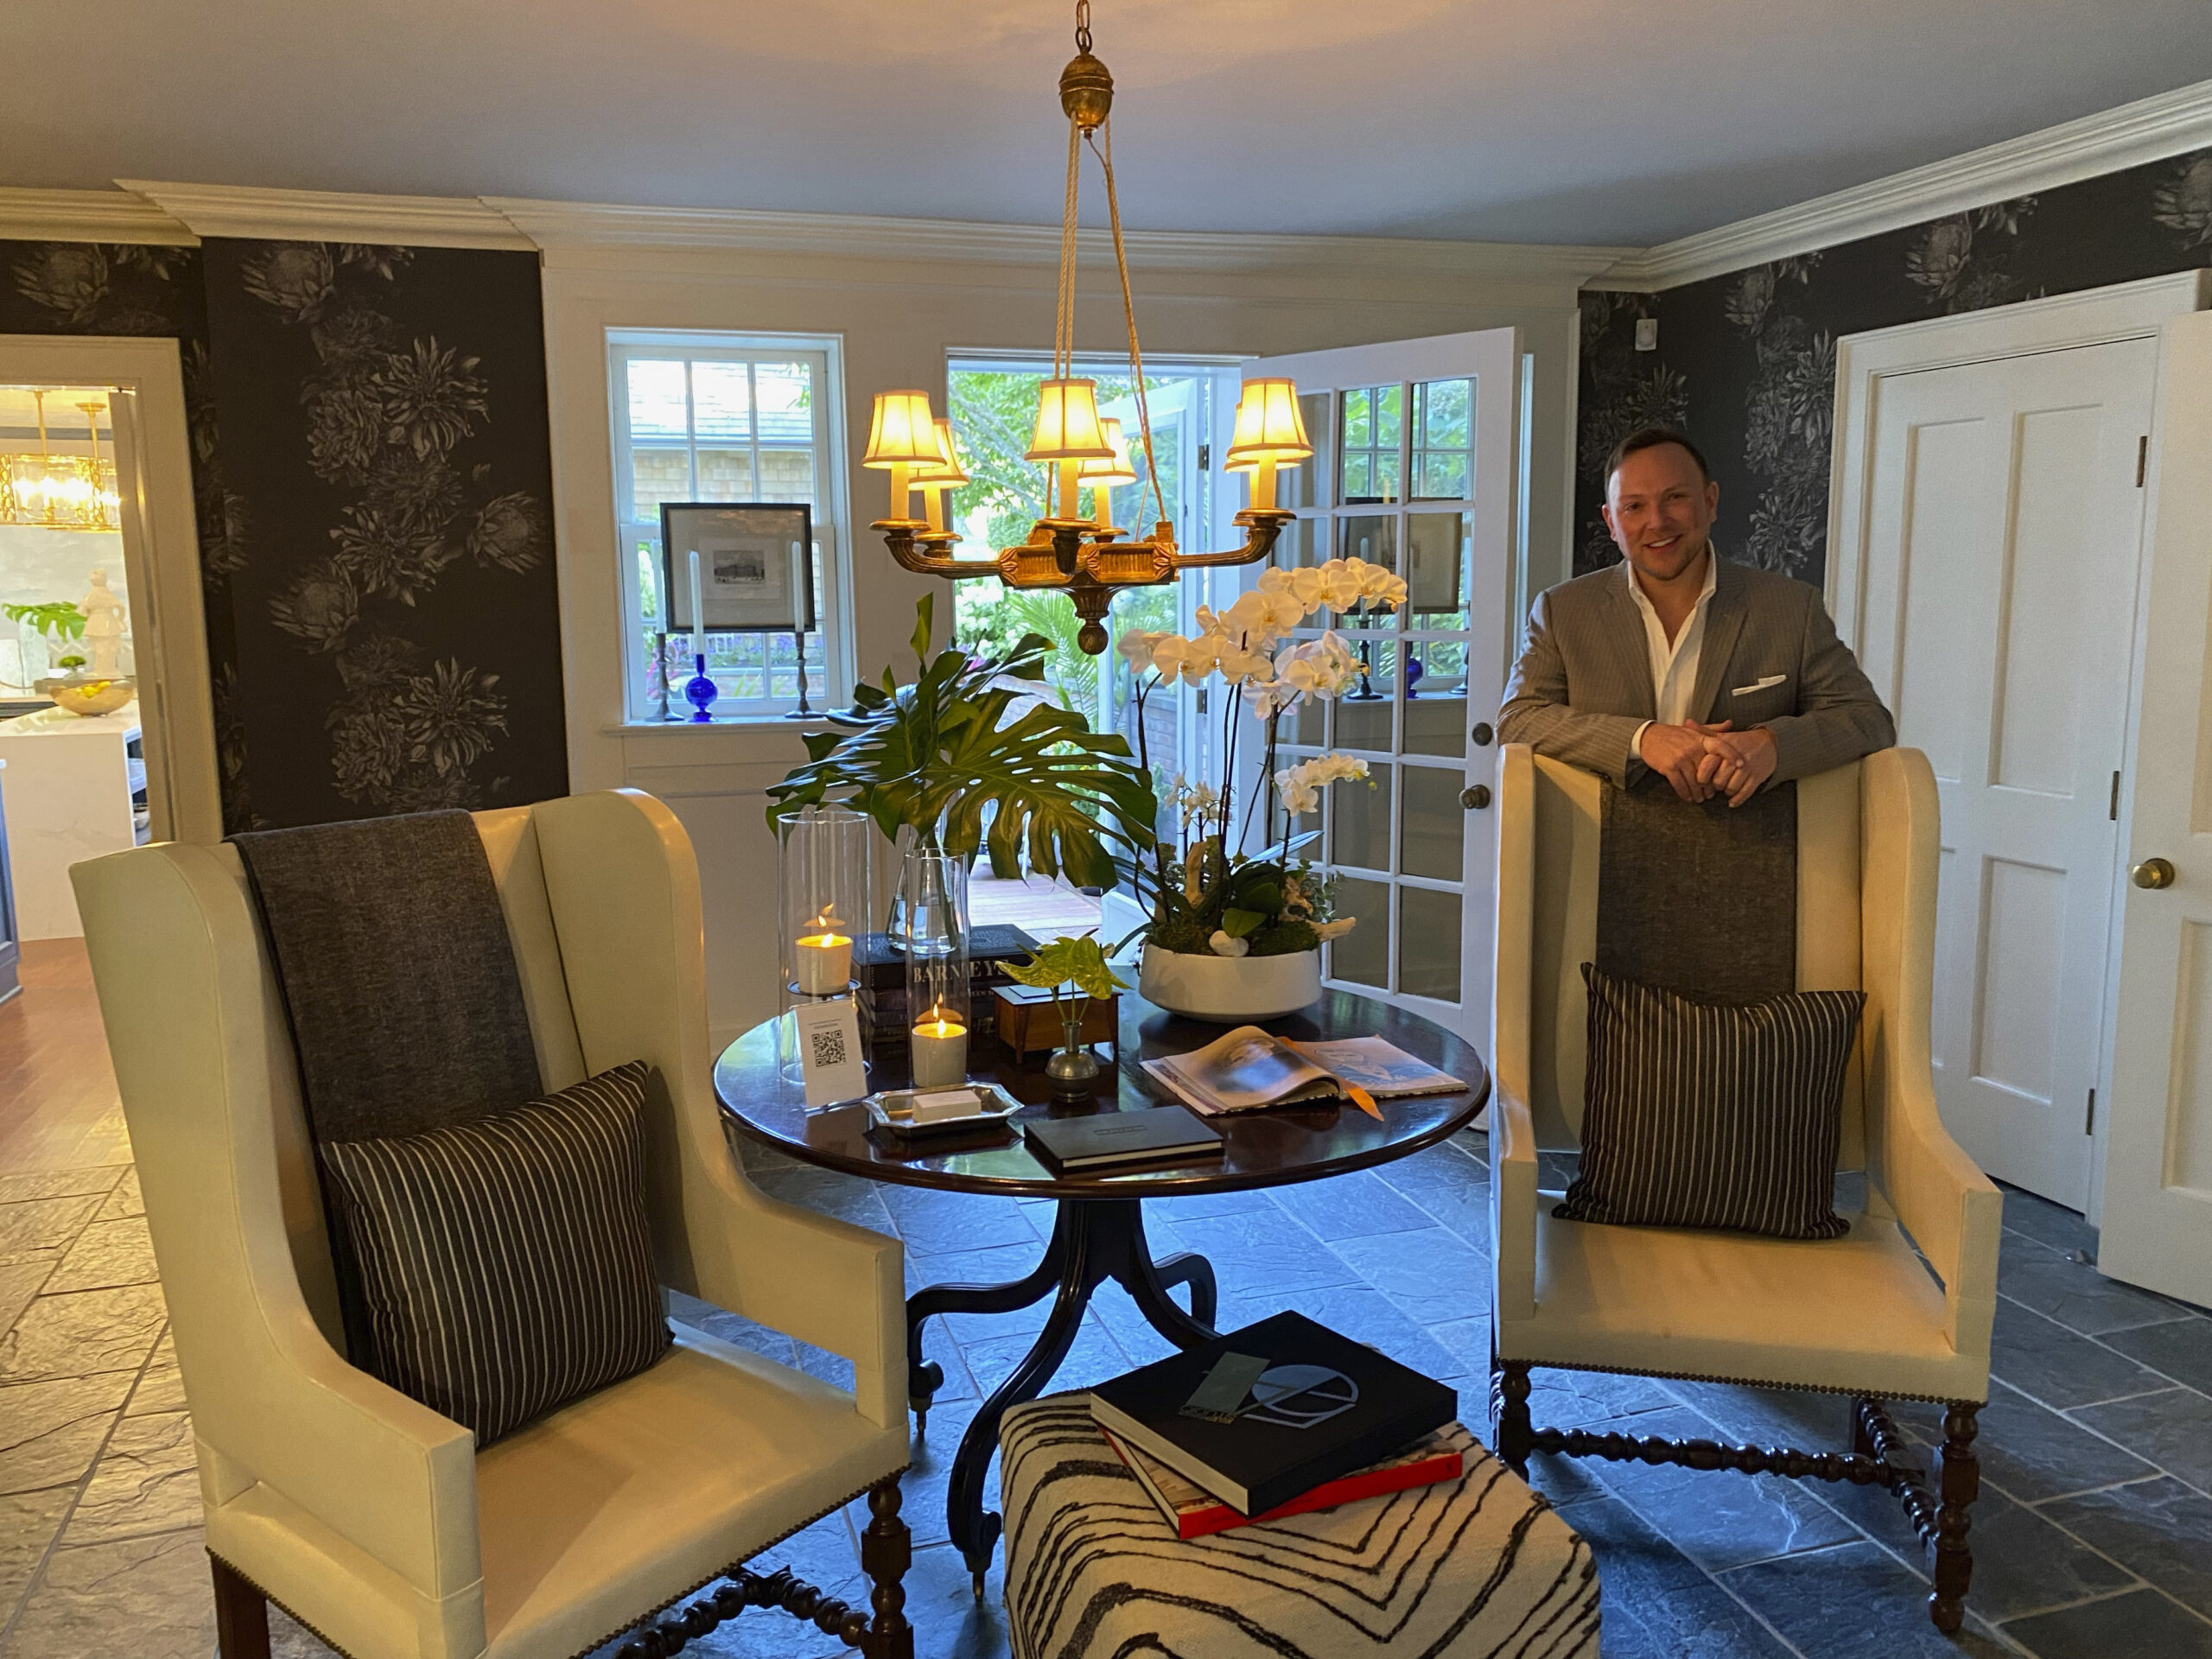 Chad James in the Foyer at the Designer Showhouse. GREG D'ELIA